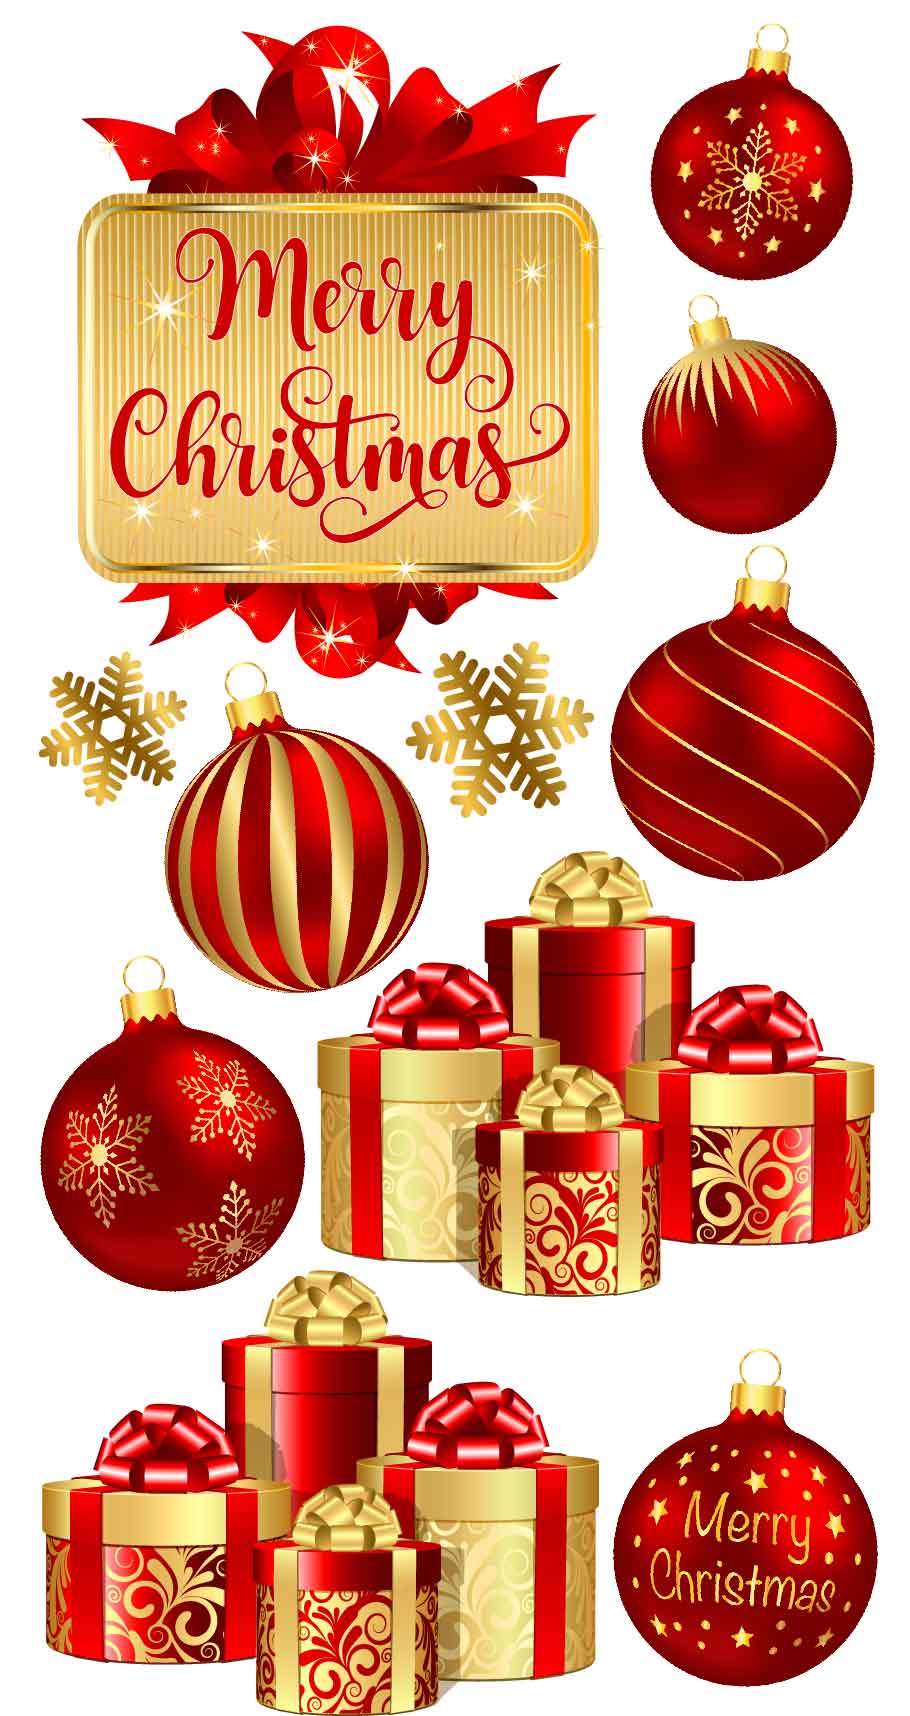 Christmas Full Set 2 - Merry Christmas - Red and Gold - Presents and Ornaments